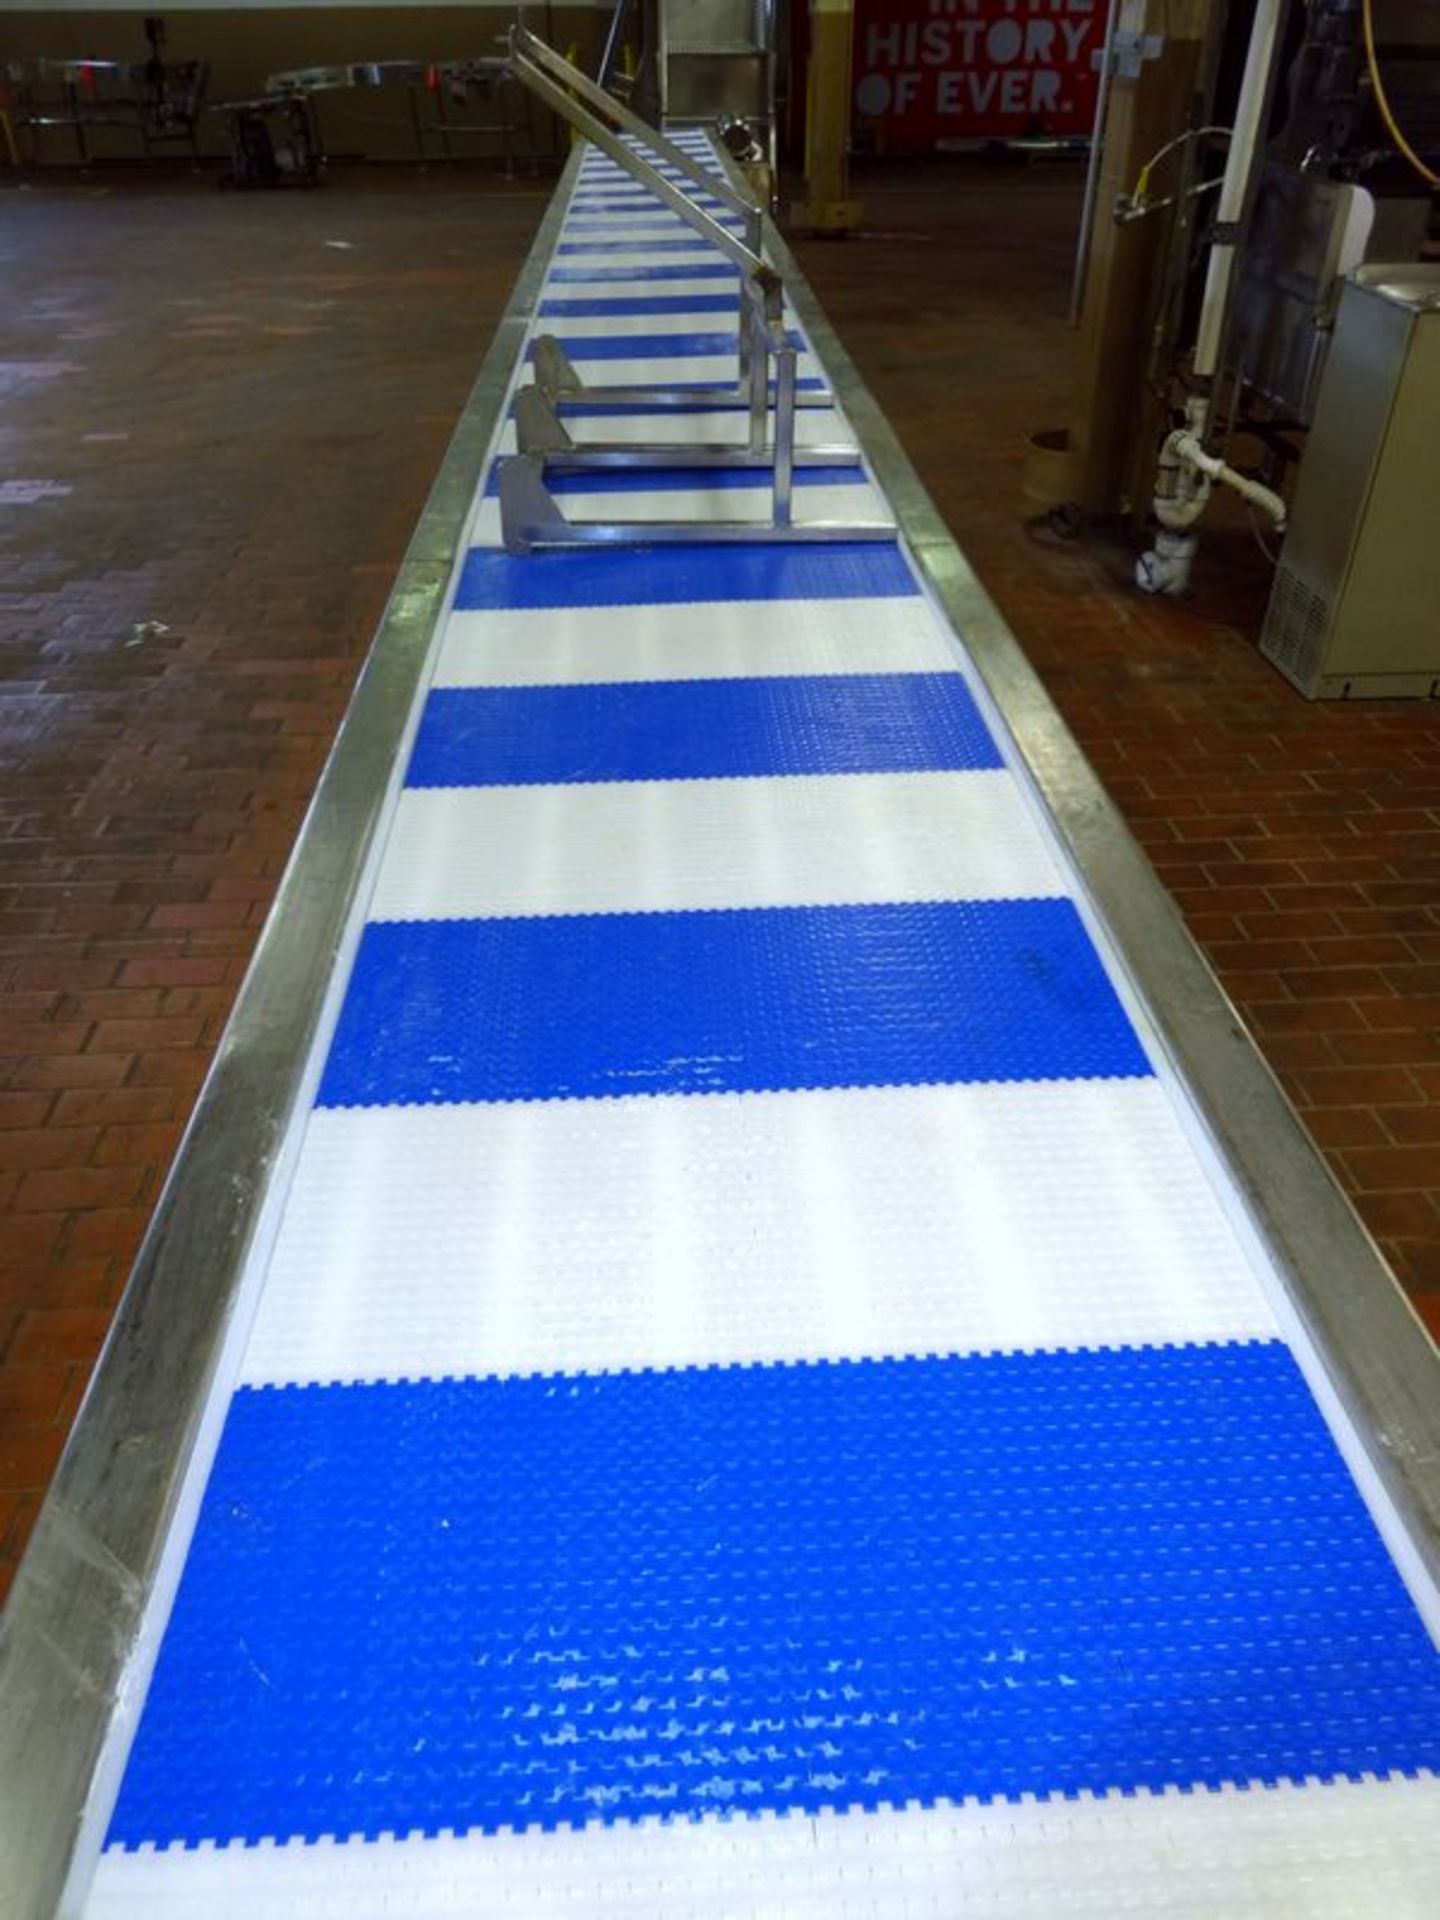 E-Quip plastic belt conveyor. Approximate 24" wide x 30' long. Stainless steel frame with motor. - Image 4 of 6